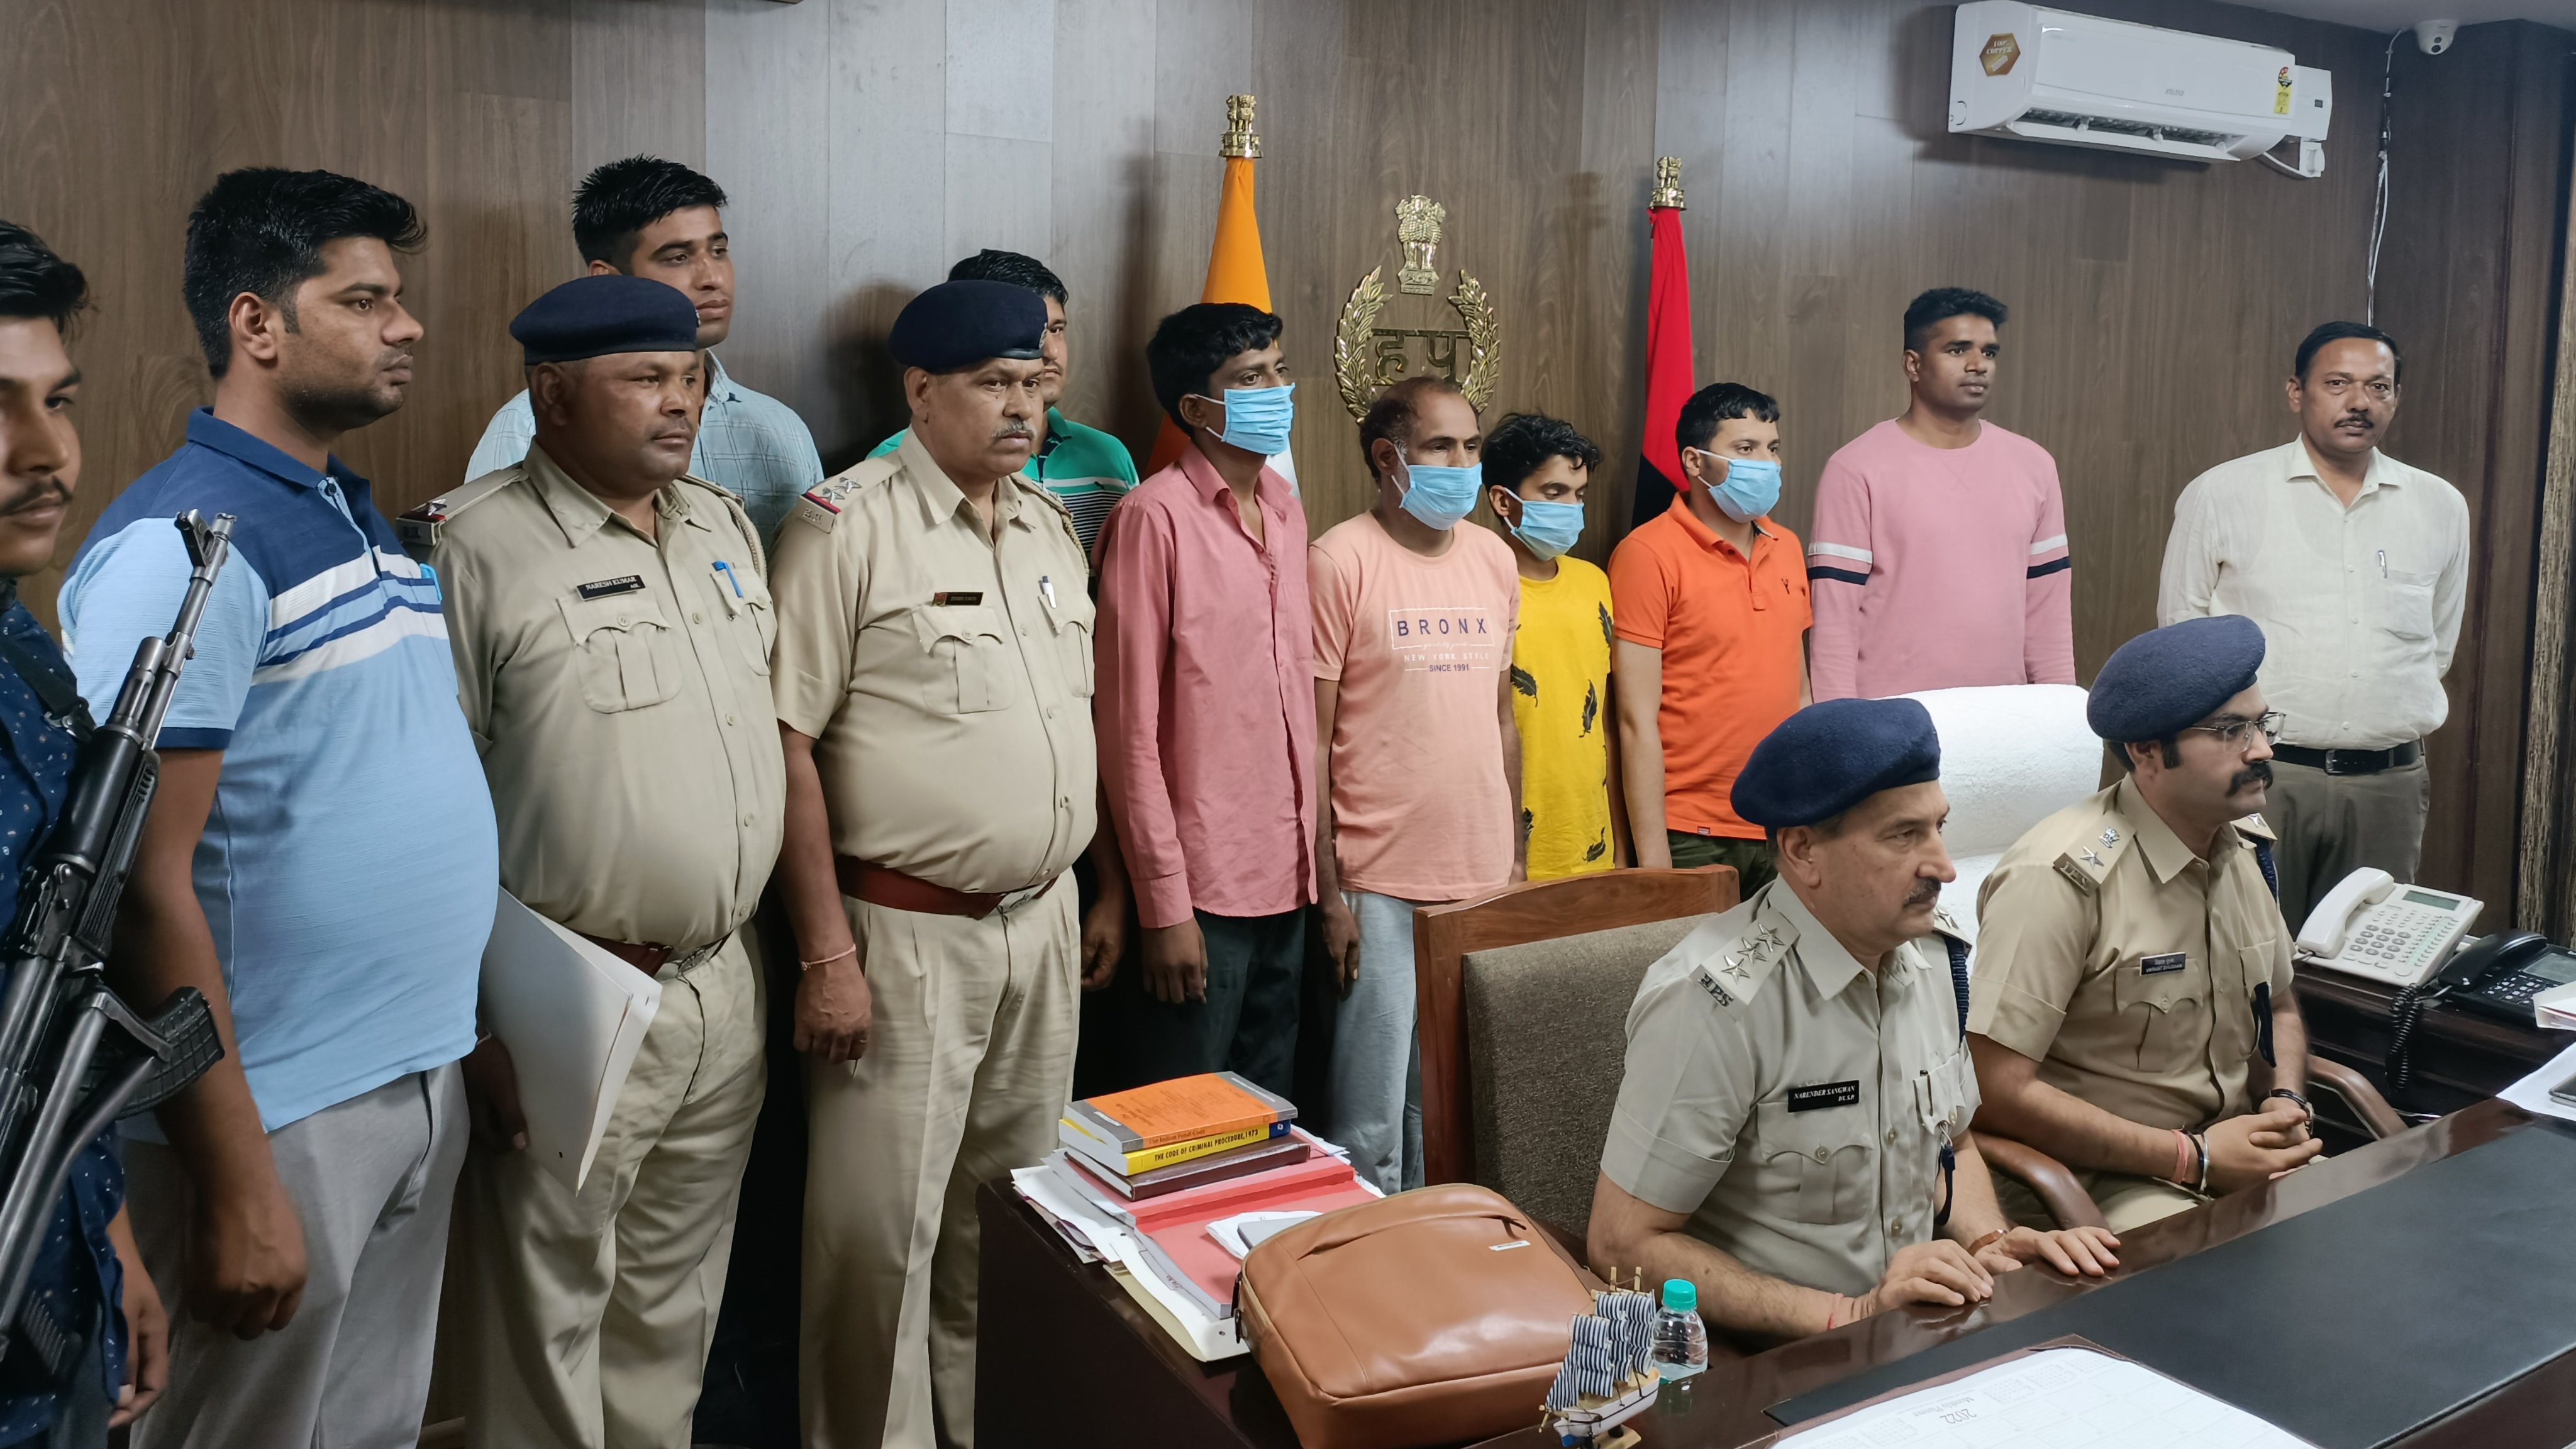 Haryana : 4 held with 10 illegal weapons, 15 cartridges